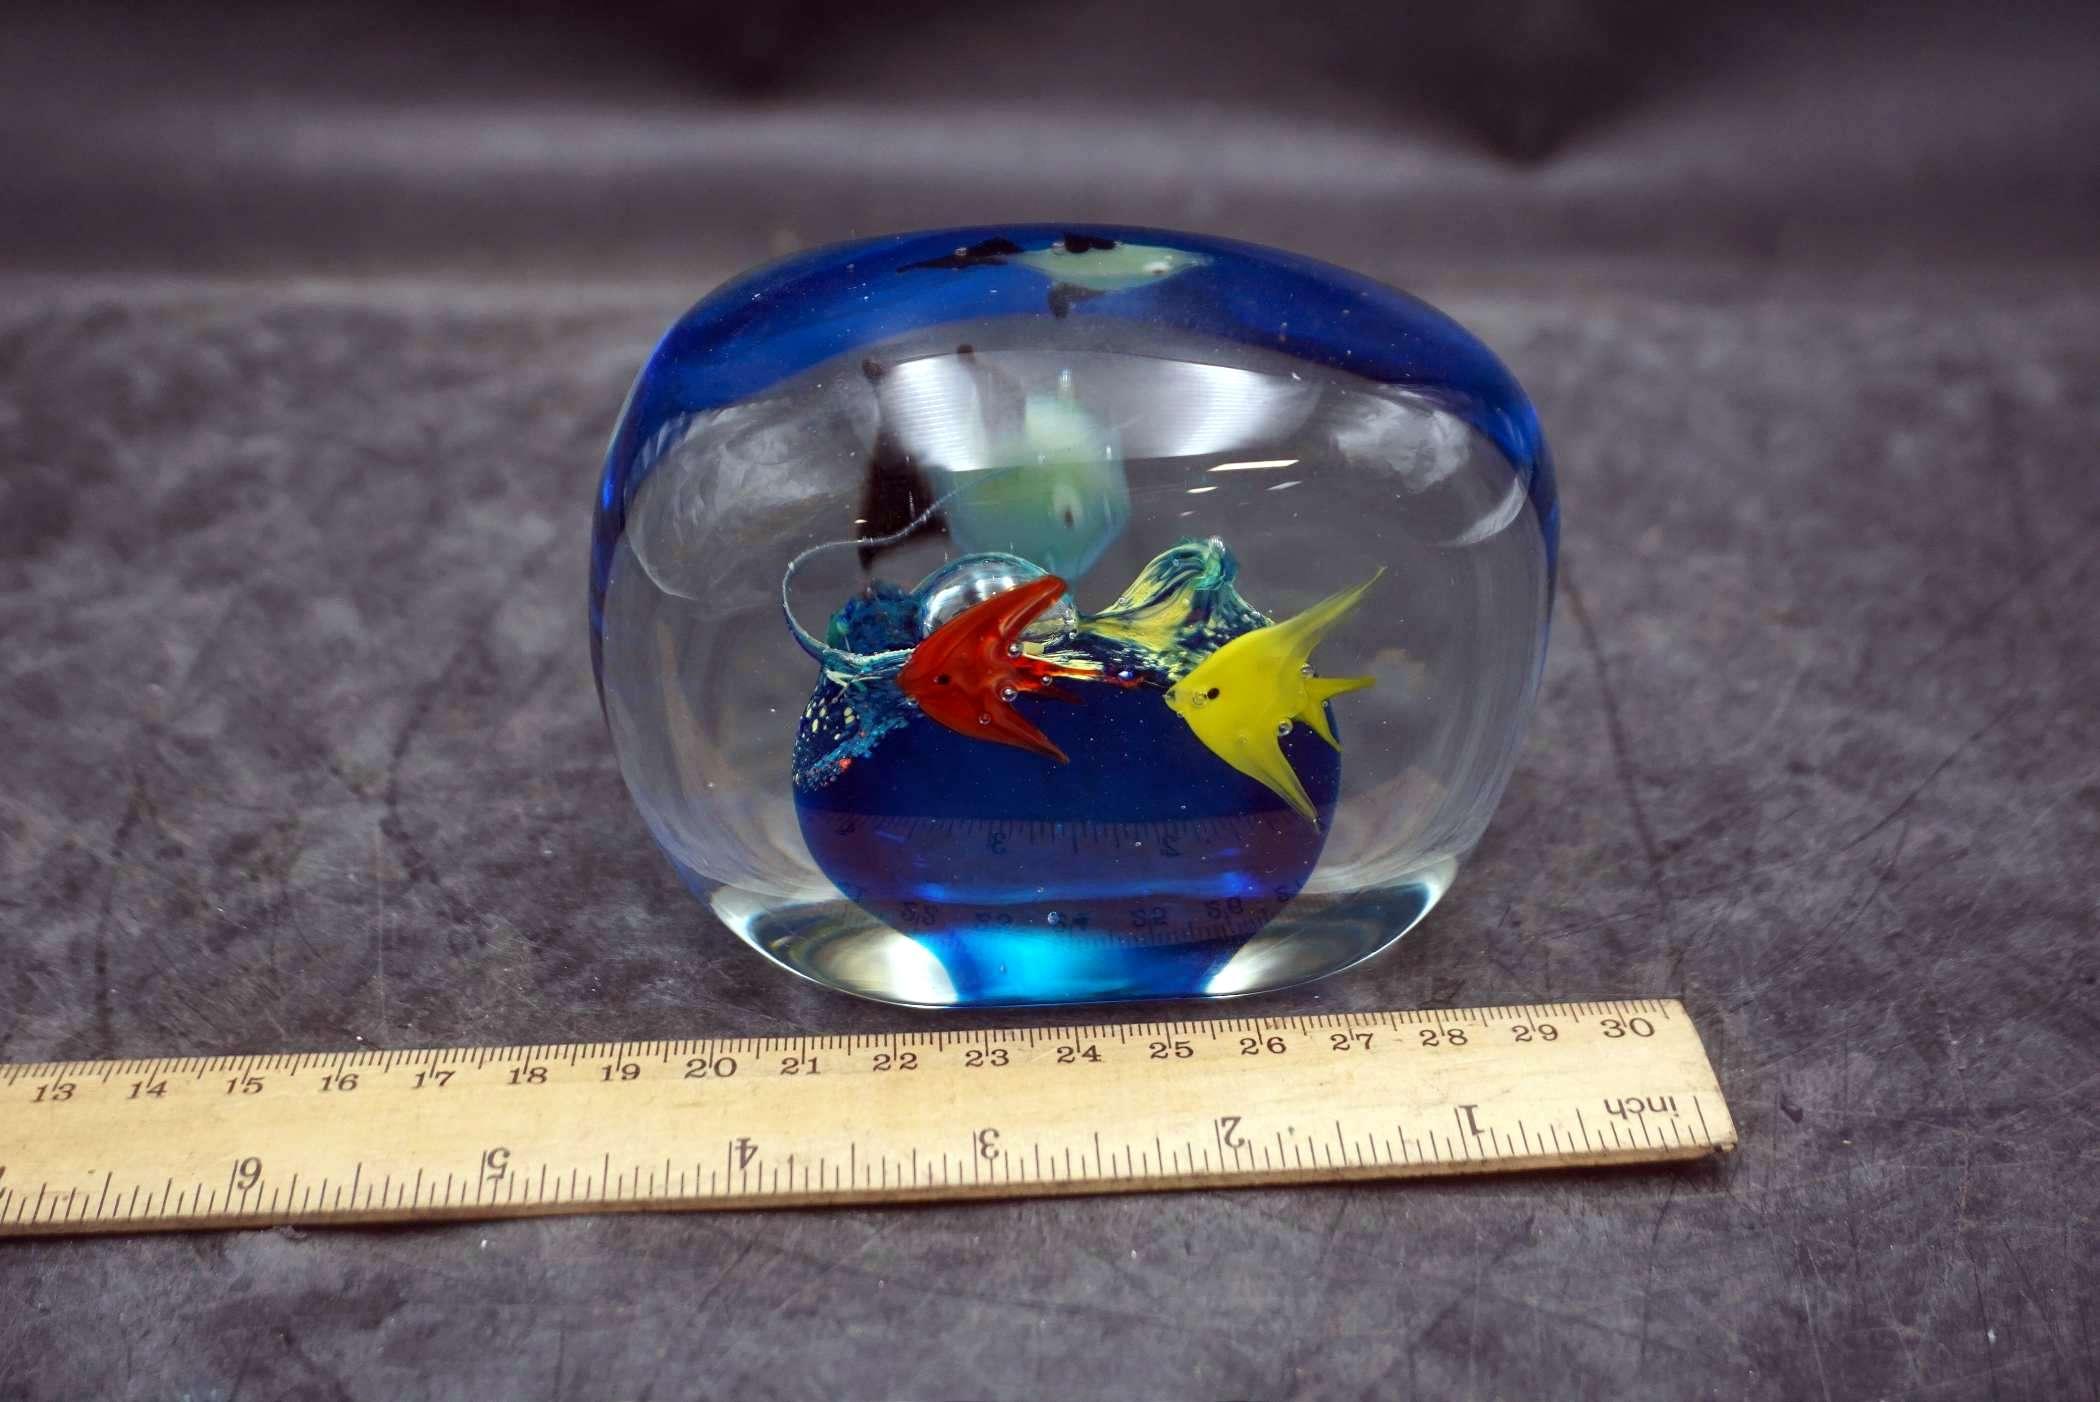 Fish & Dolphin Glass Paperweight